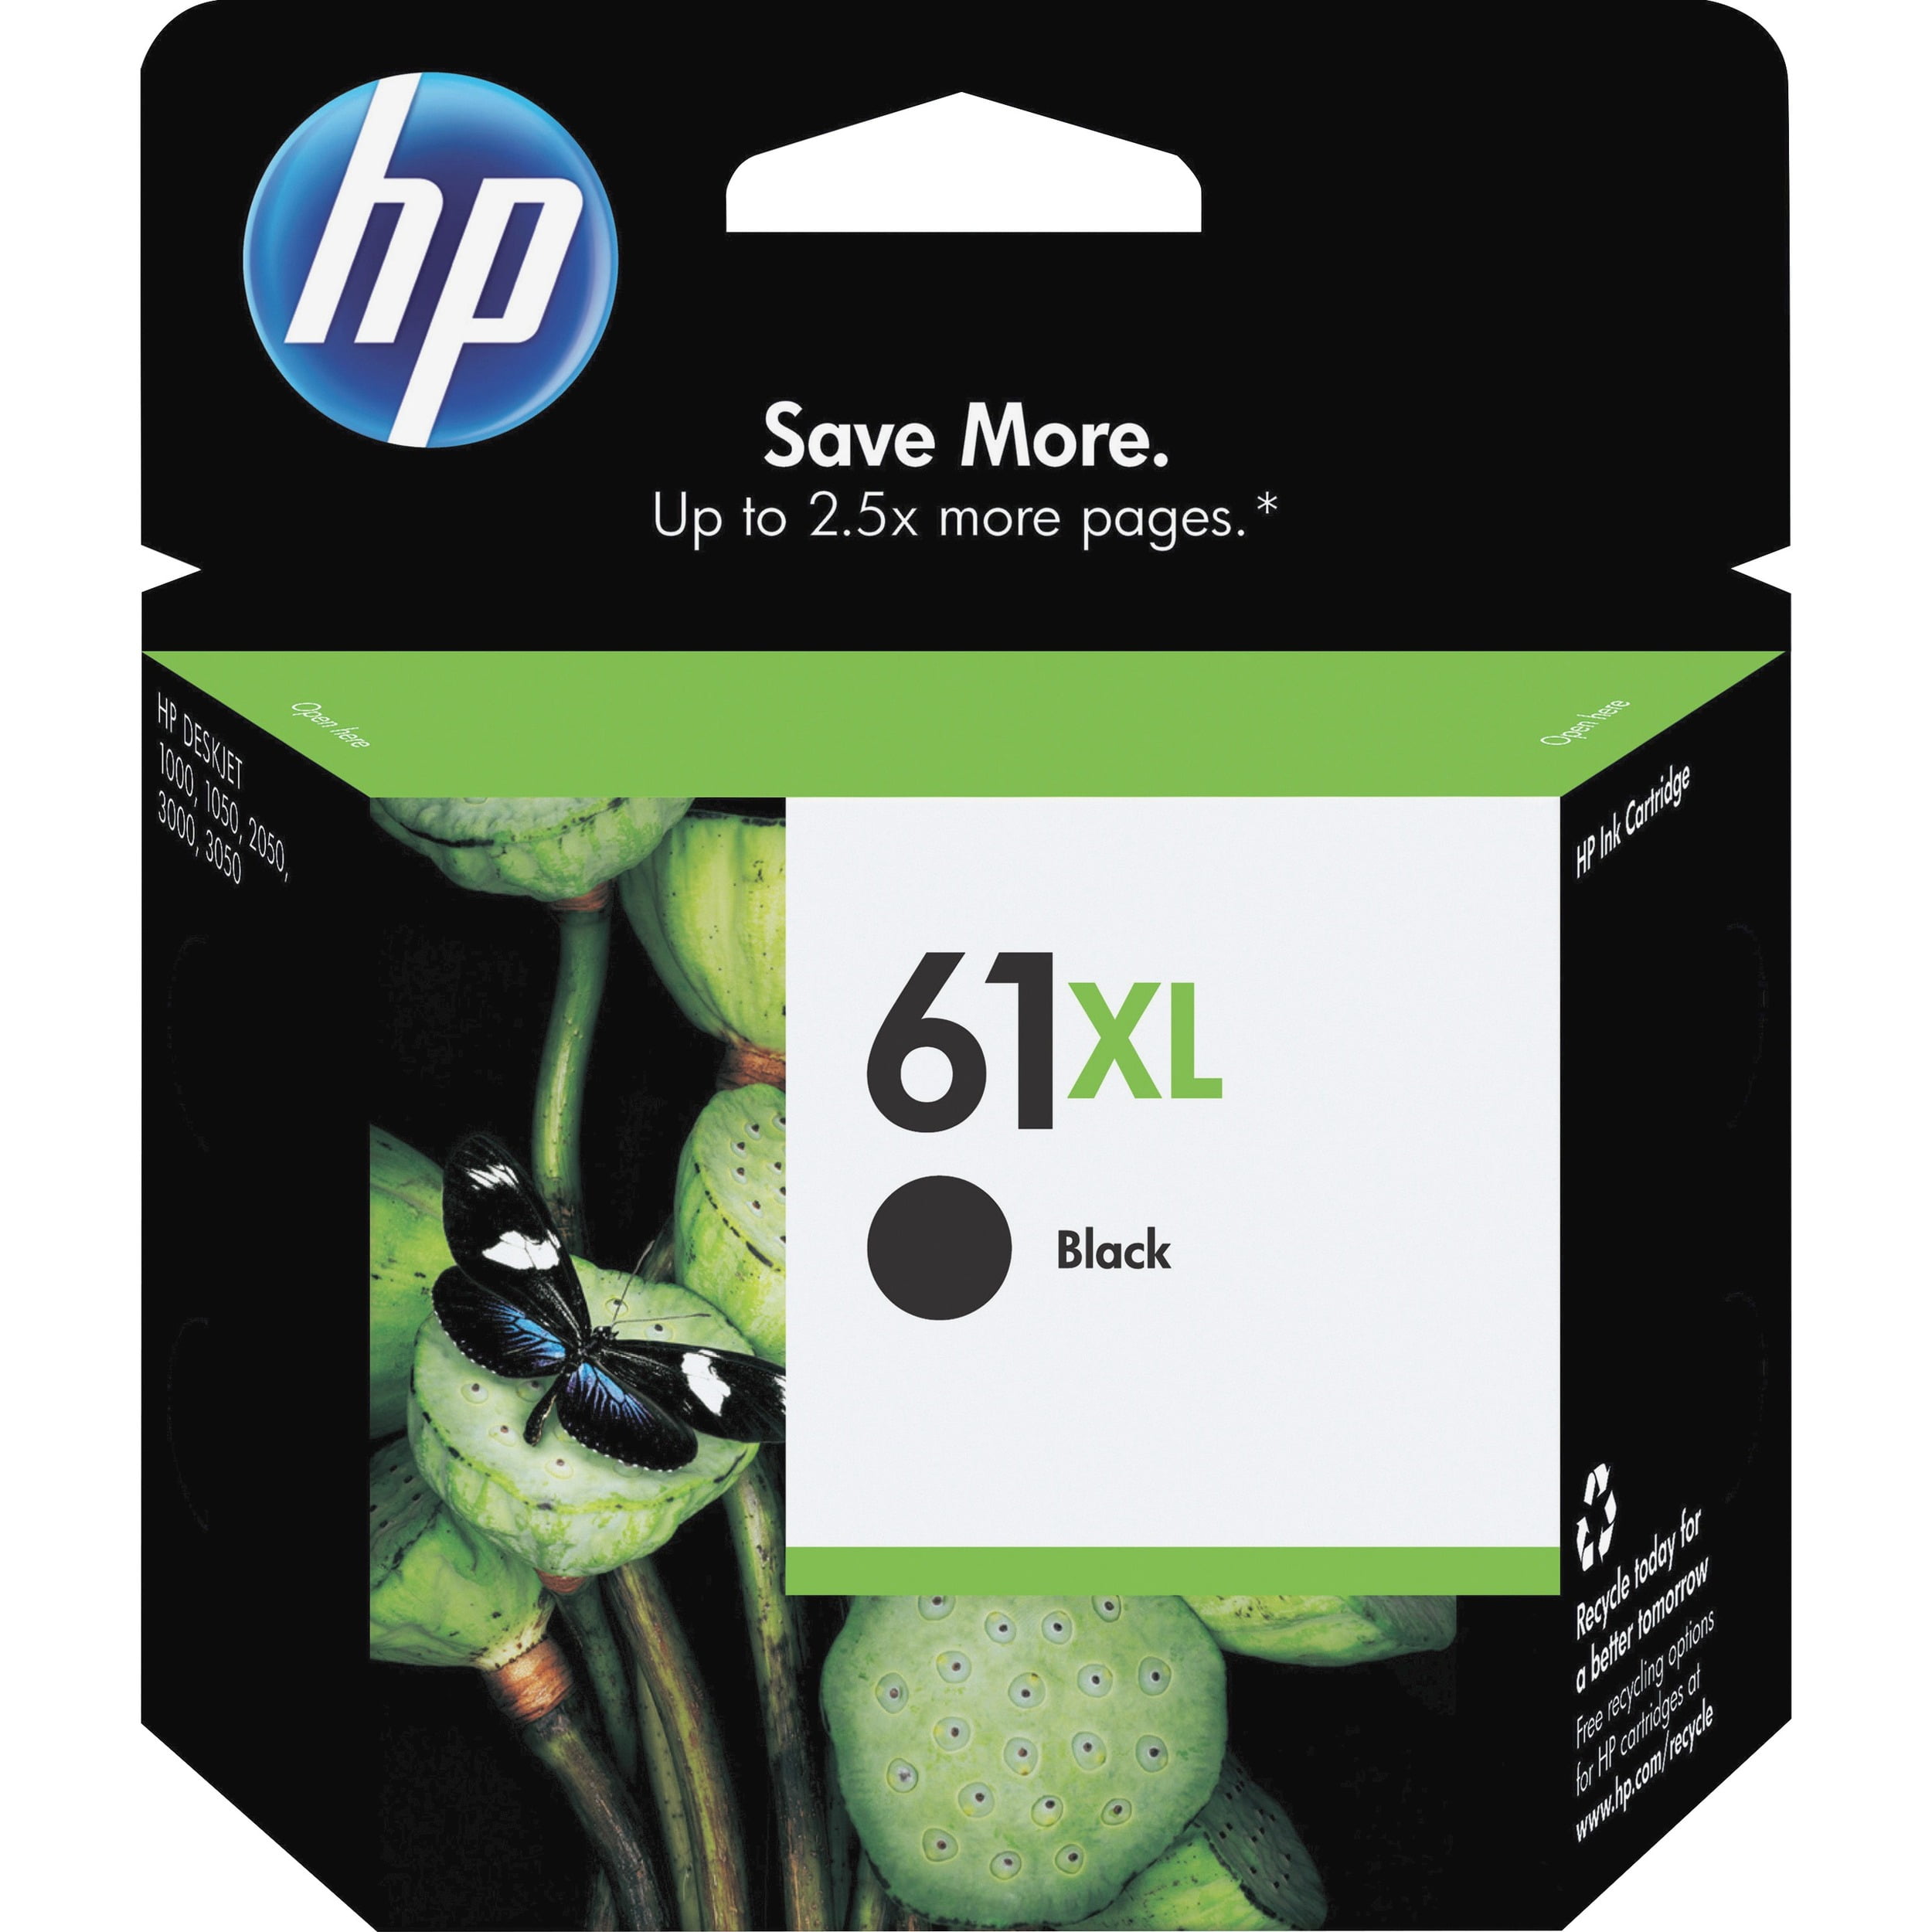 1 Black Remanufactured 61XL Ink Cartridge Replacement for HP 61XL 61 XL CH563WN for HP Envy 4500 5530 5534 5535 OfficeJet 4635 4630 2620 DeskJet 1000 1056 1512 2514 2540 2544 3000 High Yield